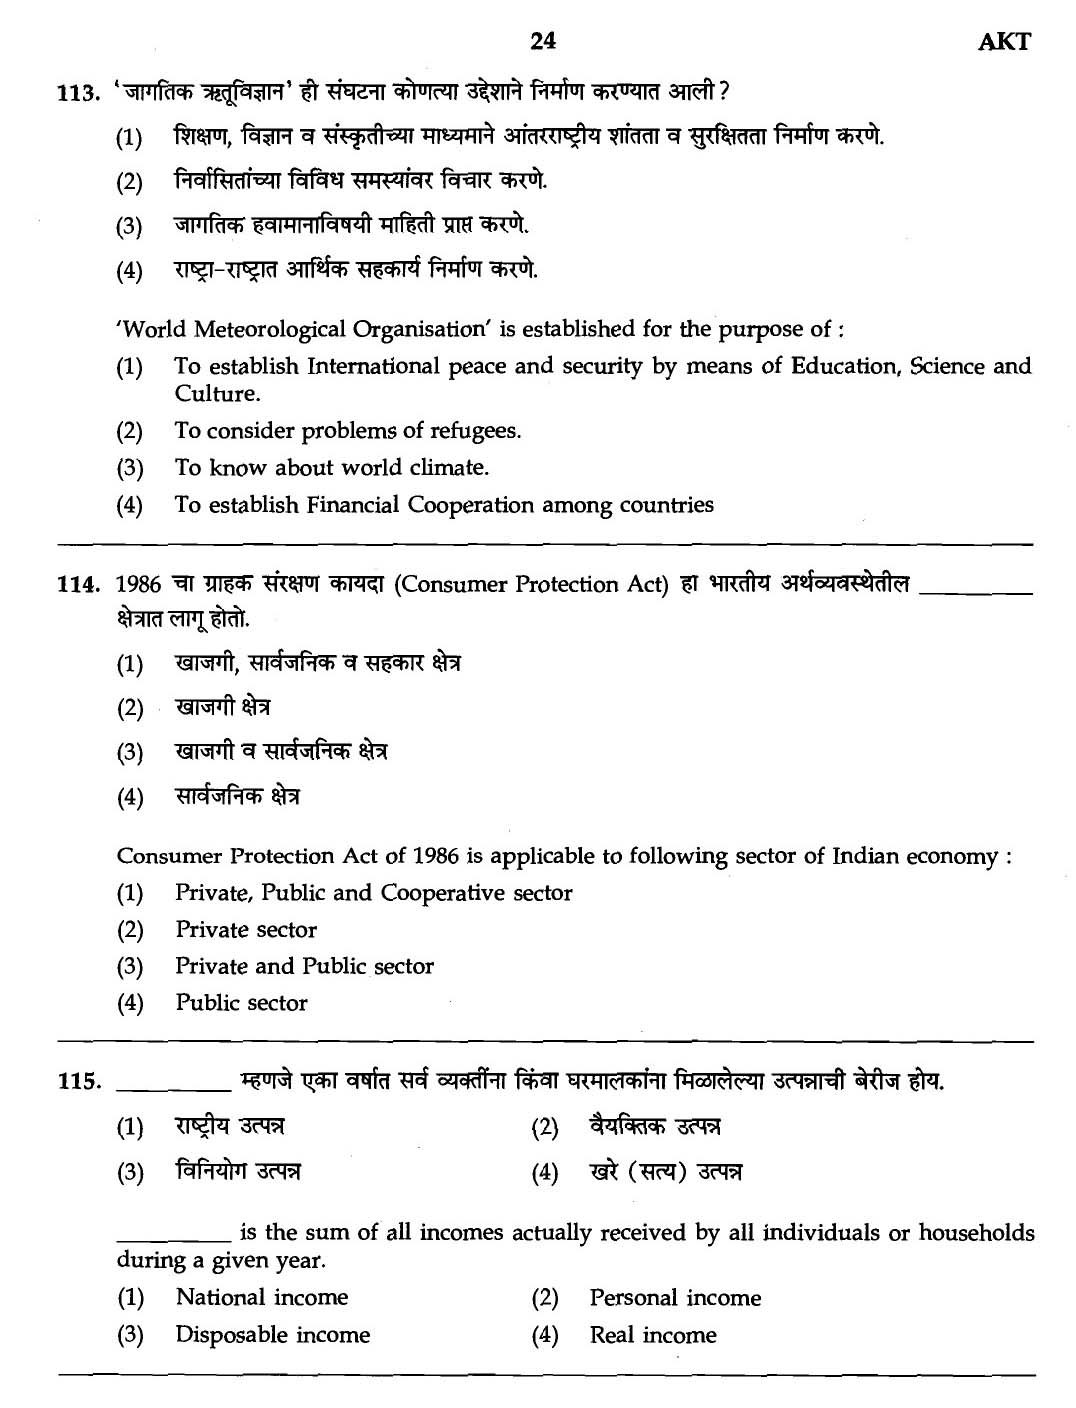 MPSC Agricultural Services Exam 2007 General Question Paper 22